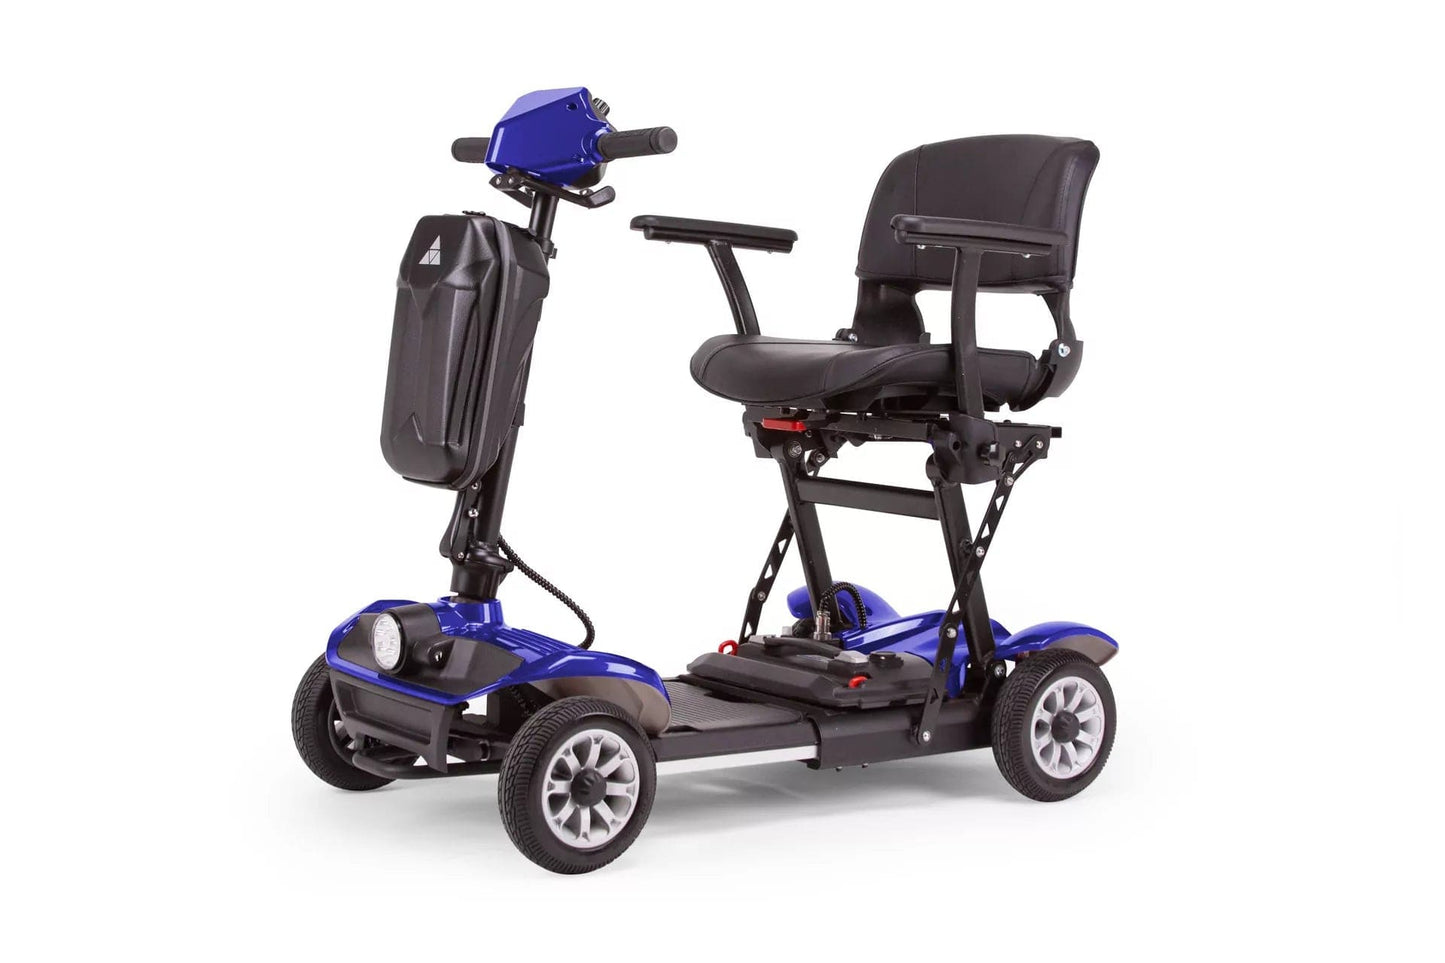 EWheels EW-26 Folding Mobility Scooter - Wheelchairs in Motion